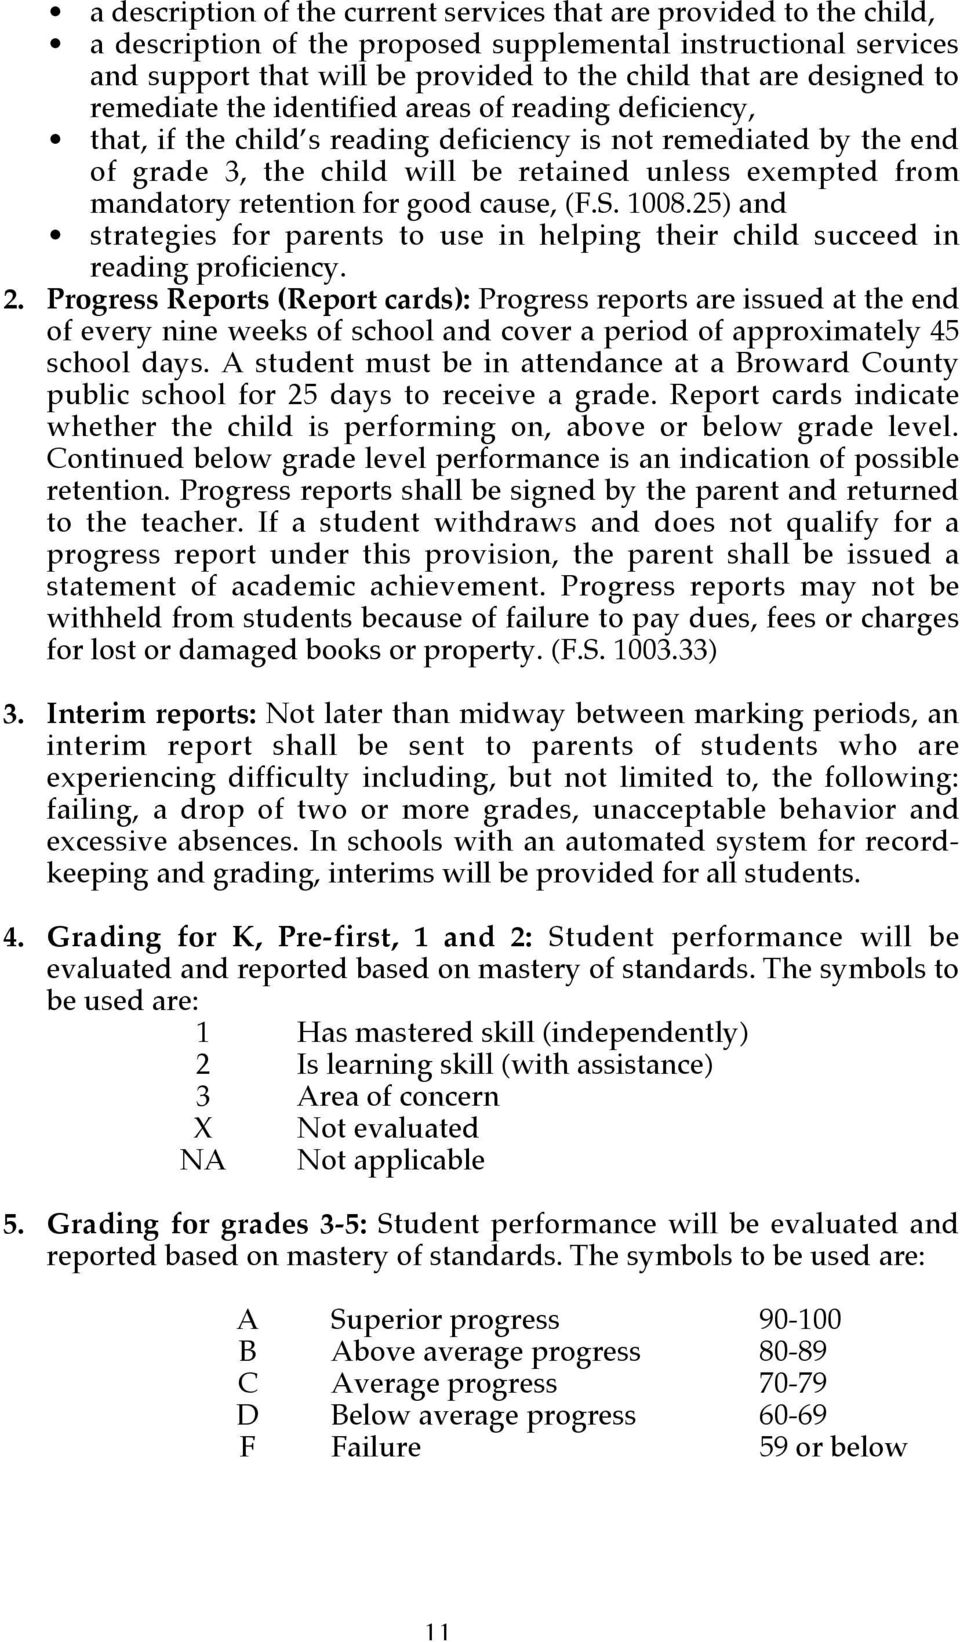 mandatory retention for good cause, (F.S. 1008.25) and strategies for parents to use in helping their child succeed in reading proficiency. 2.